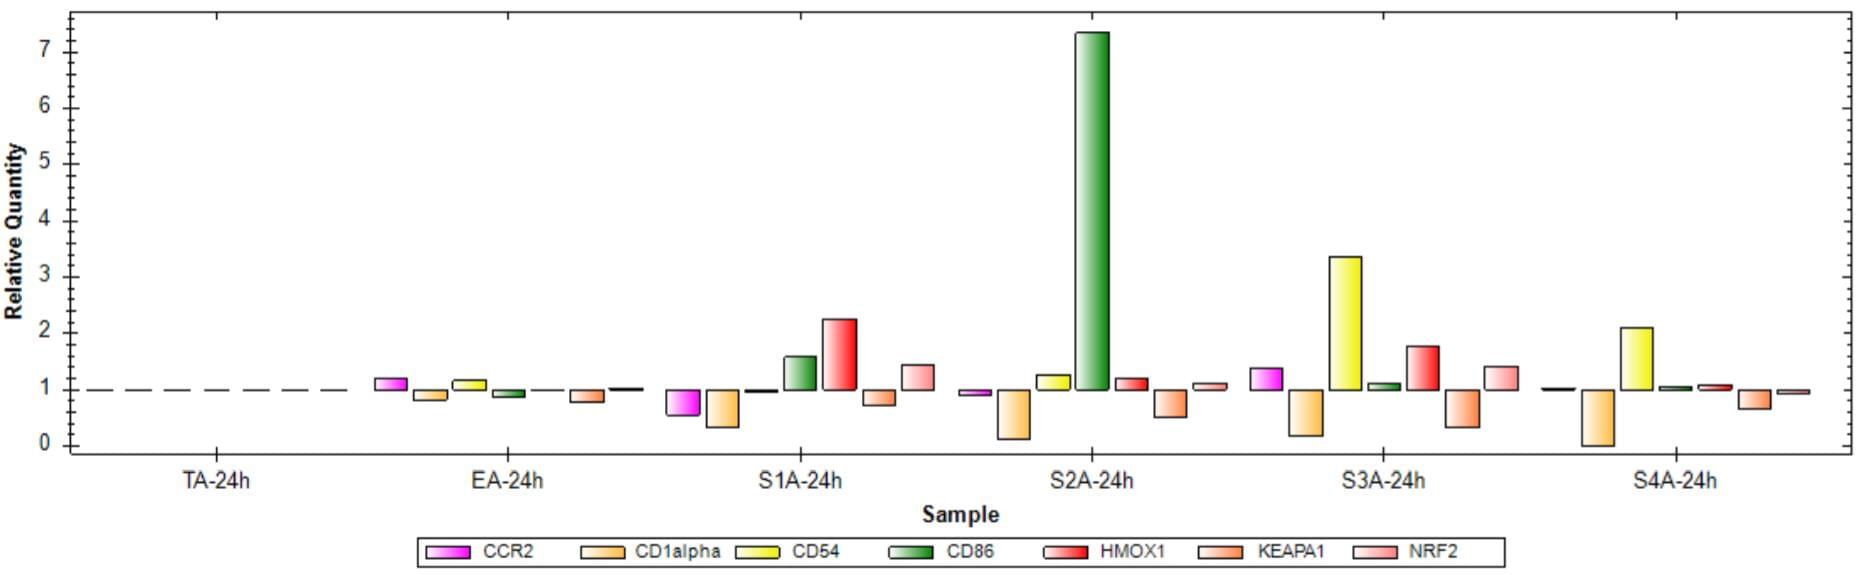 Gene expression analysis after treatment for 24 hours with sensitizers